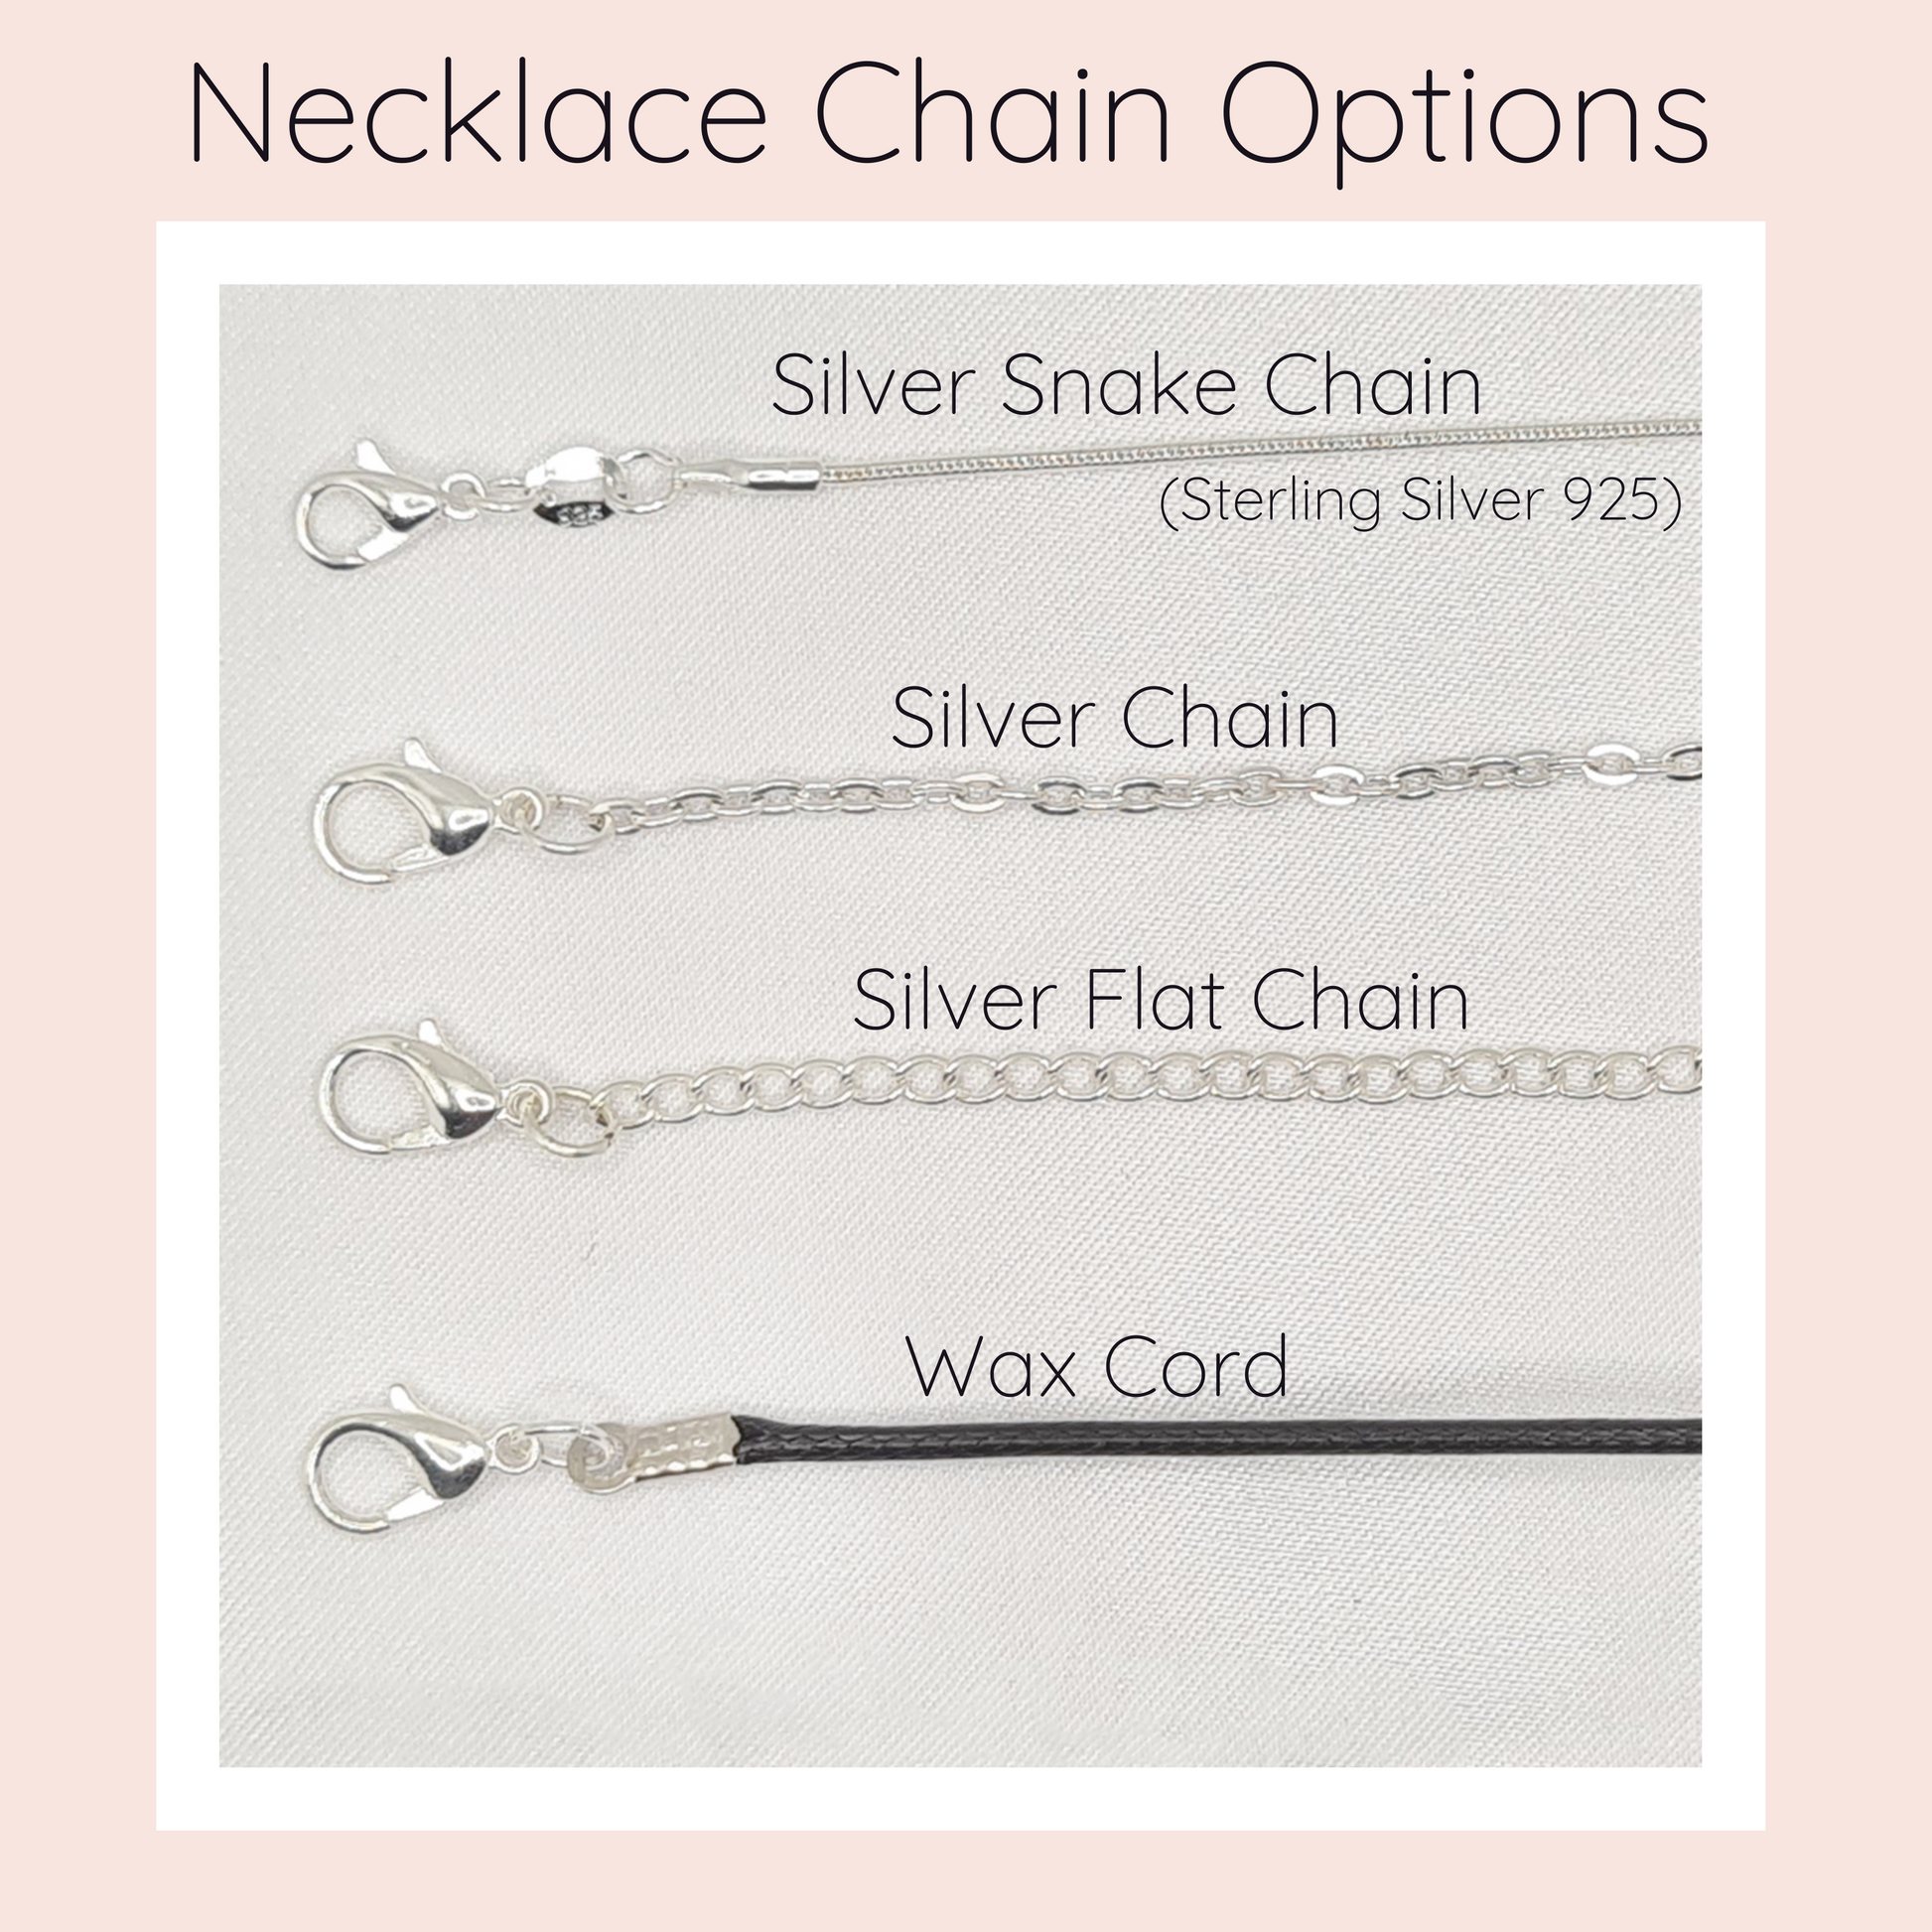 Necklace chain option chart